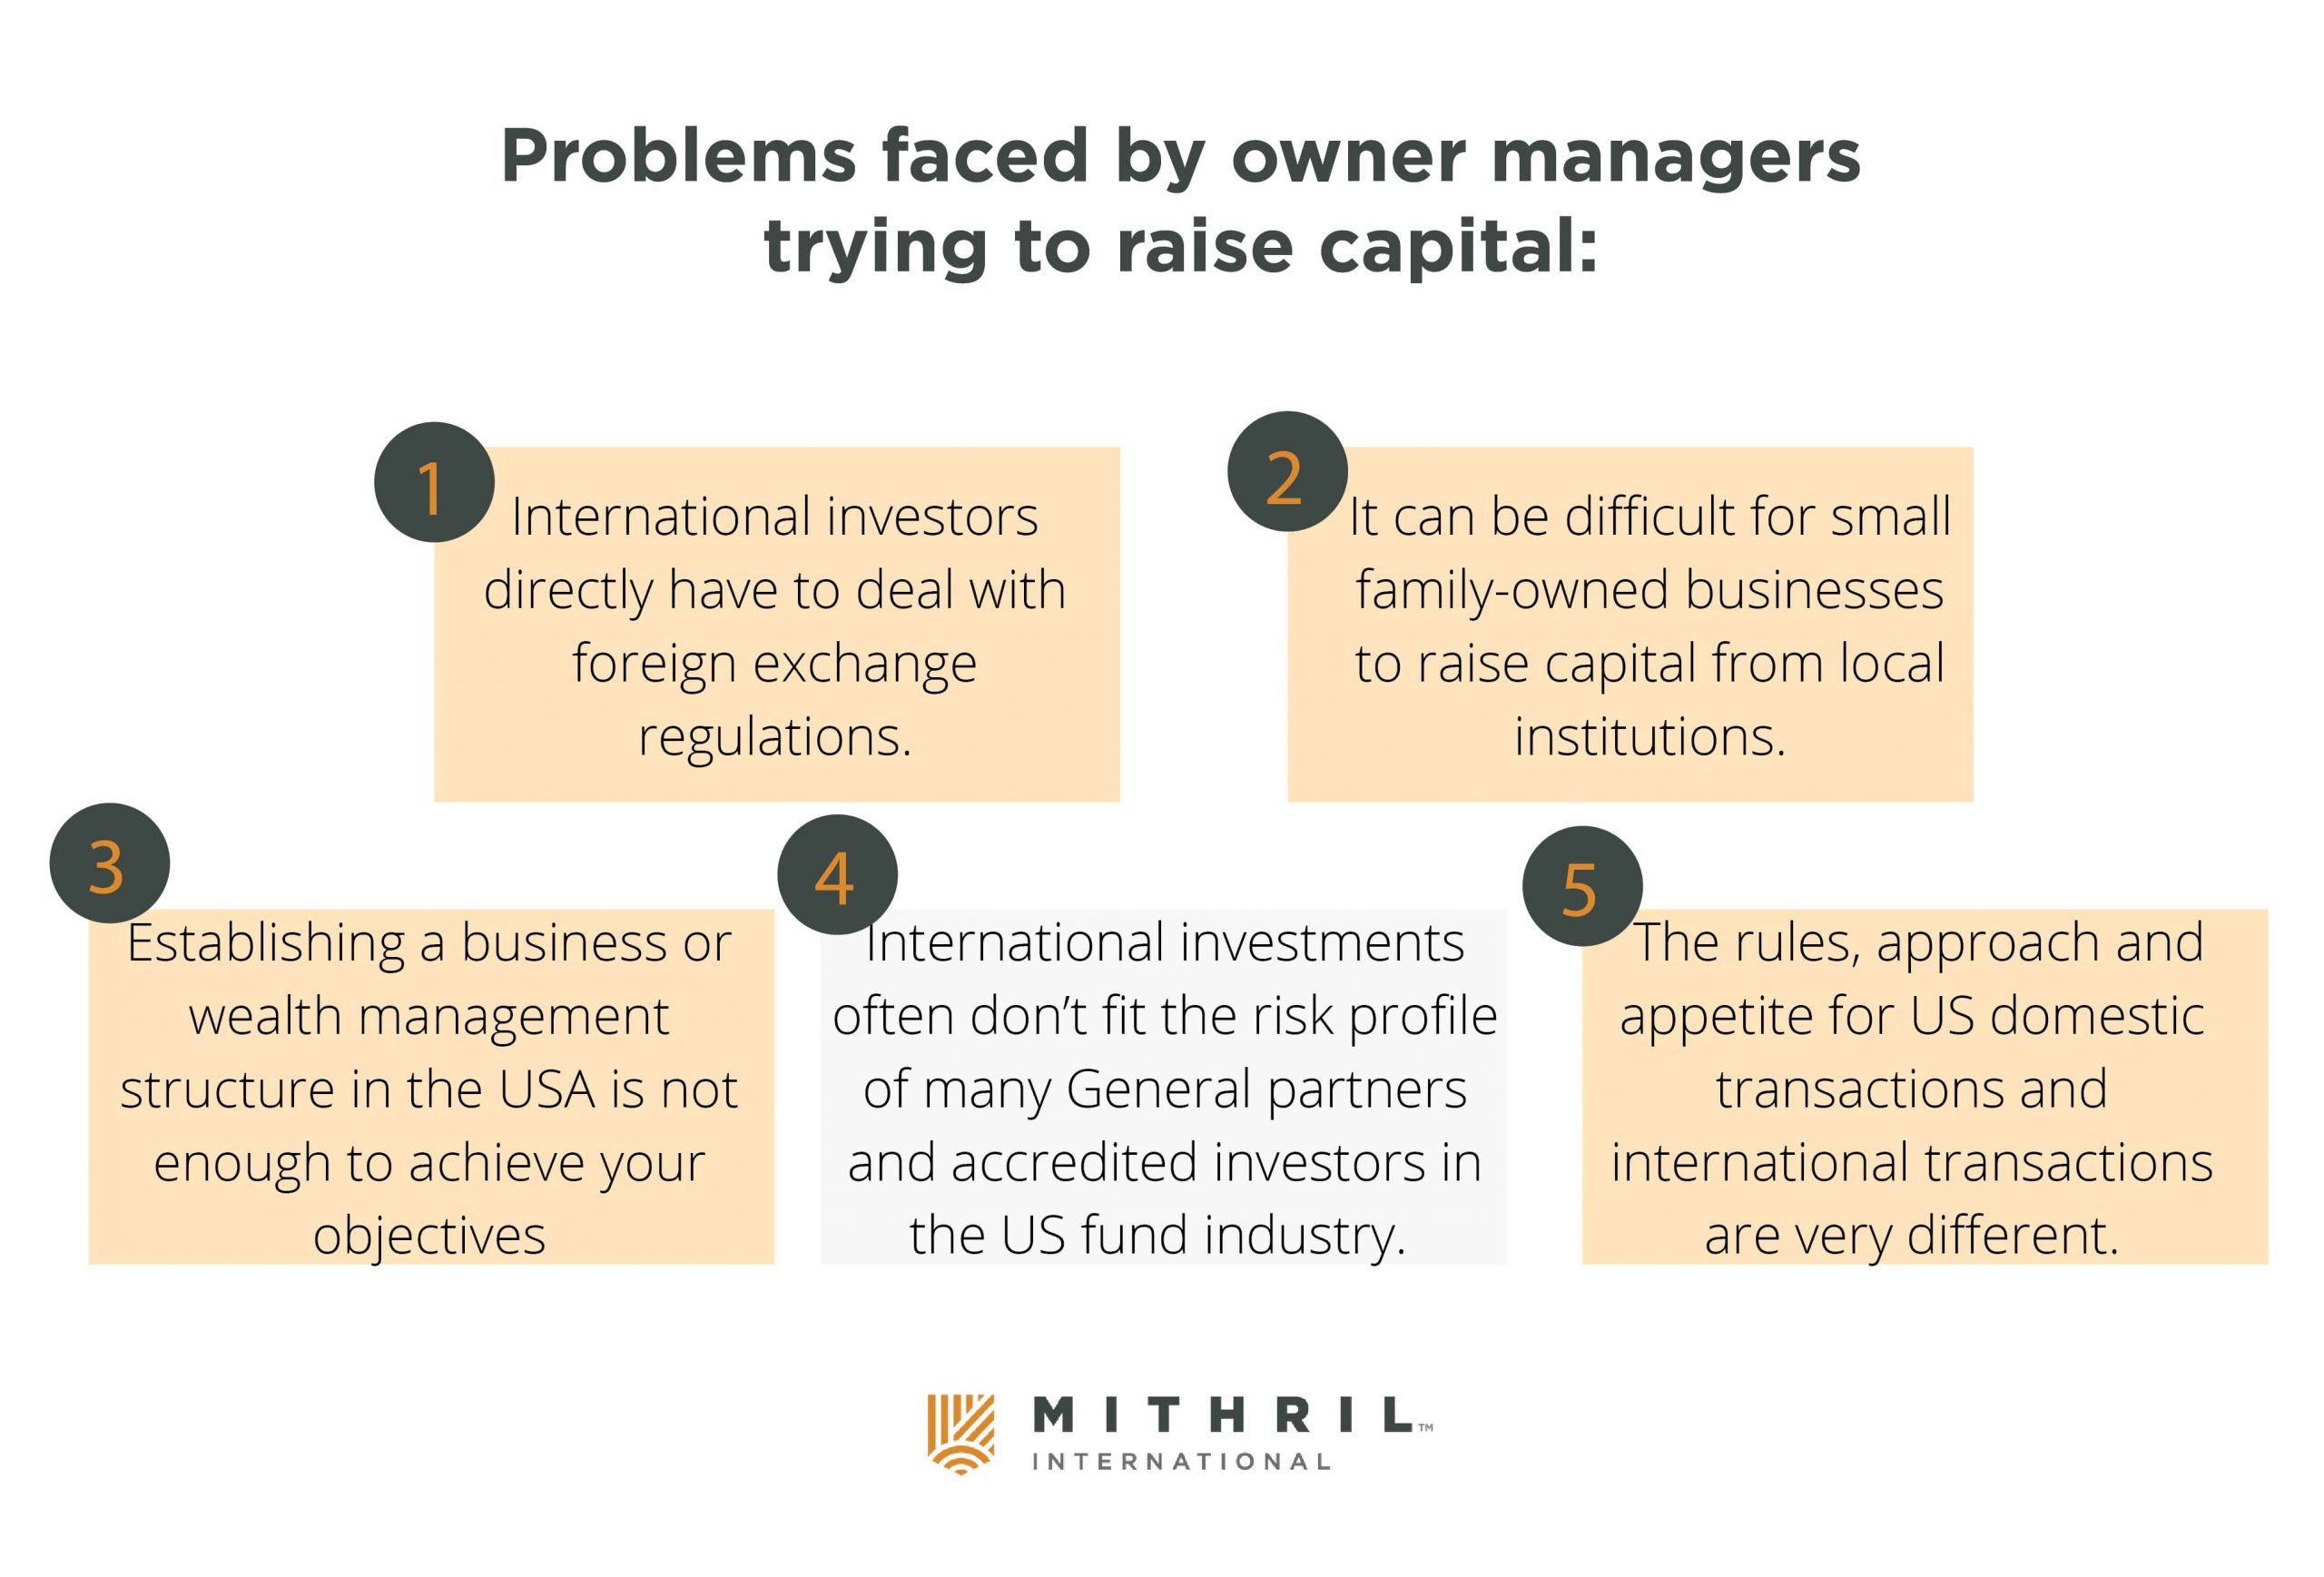 Mithril International Compliant Solutions, Tax compliance, International Tax Barbados, Law firm services Barbados, fiduciary services Barbados, off shore Barbados, Cross Boarder solutions Barbados, Trust Advisory